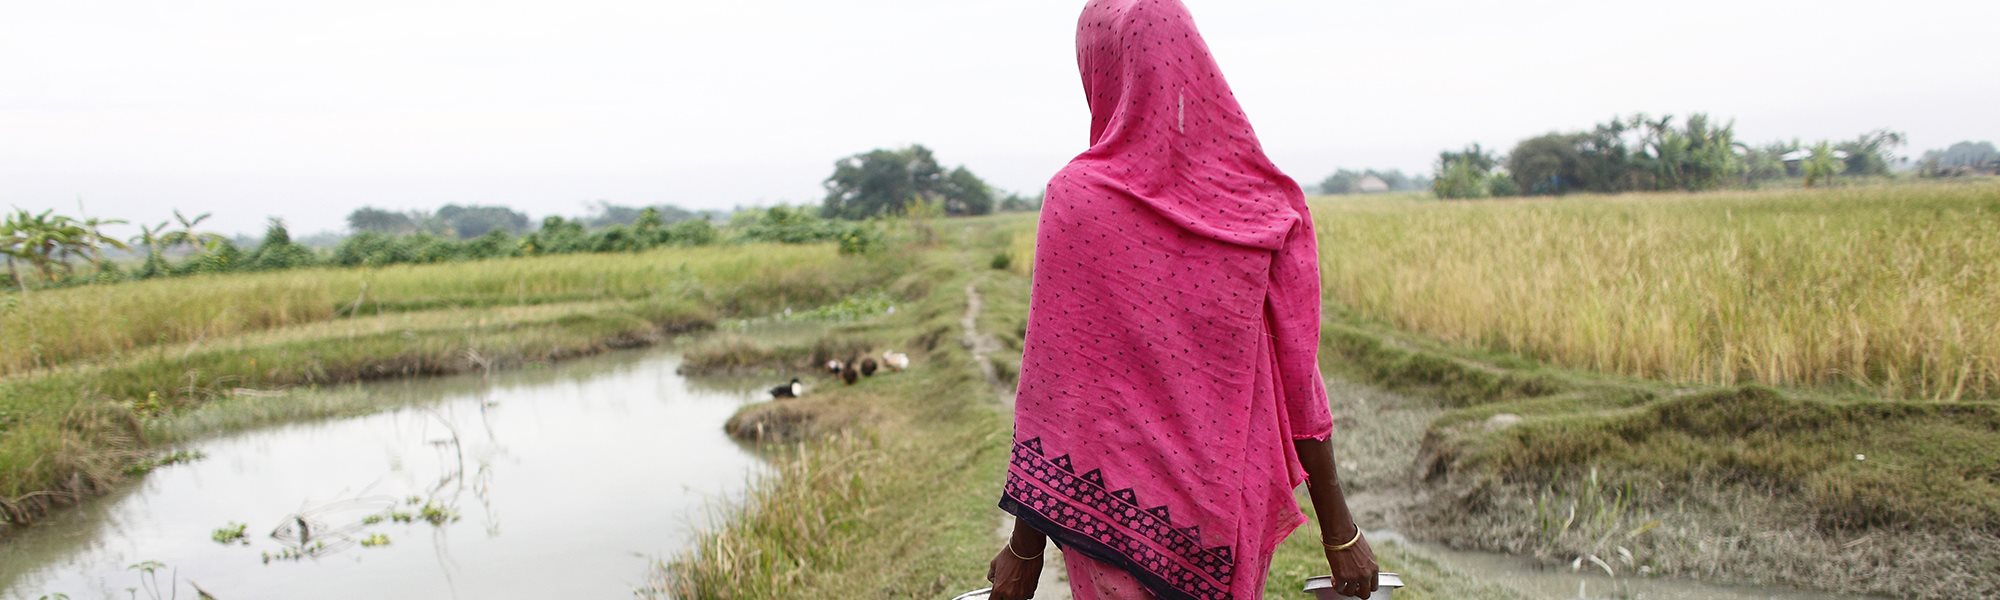 A woman walking by a riverbank holding two pots to collect water